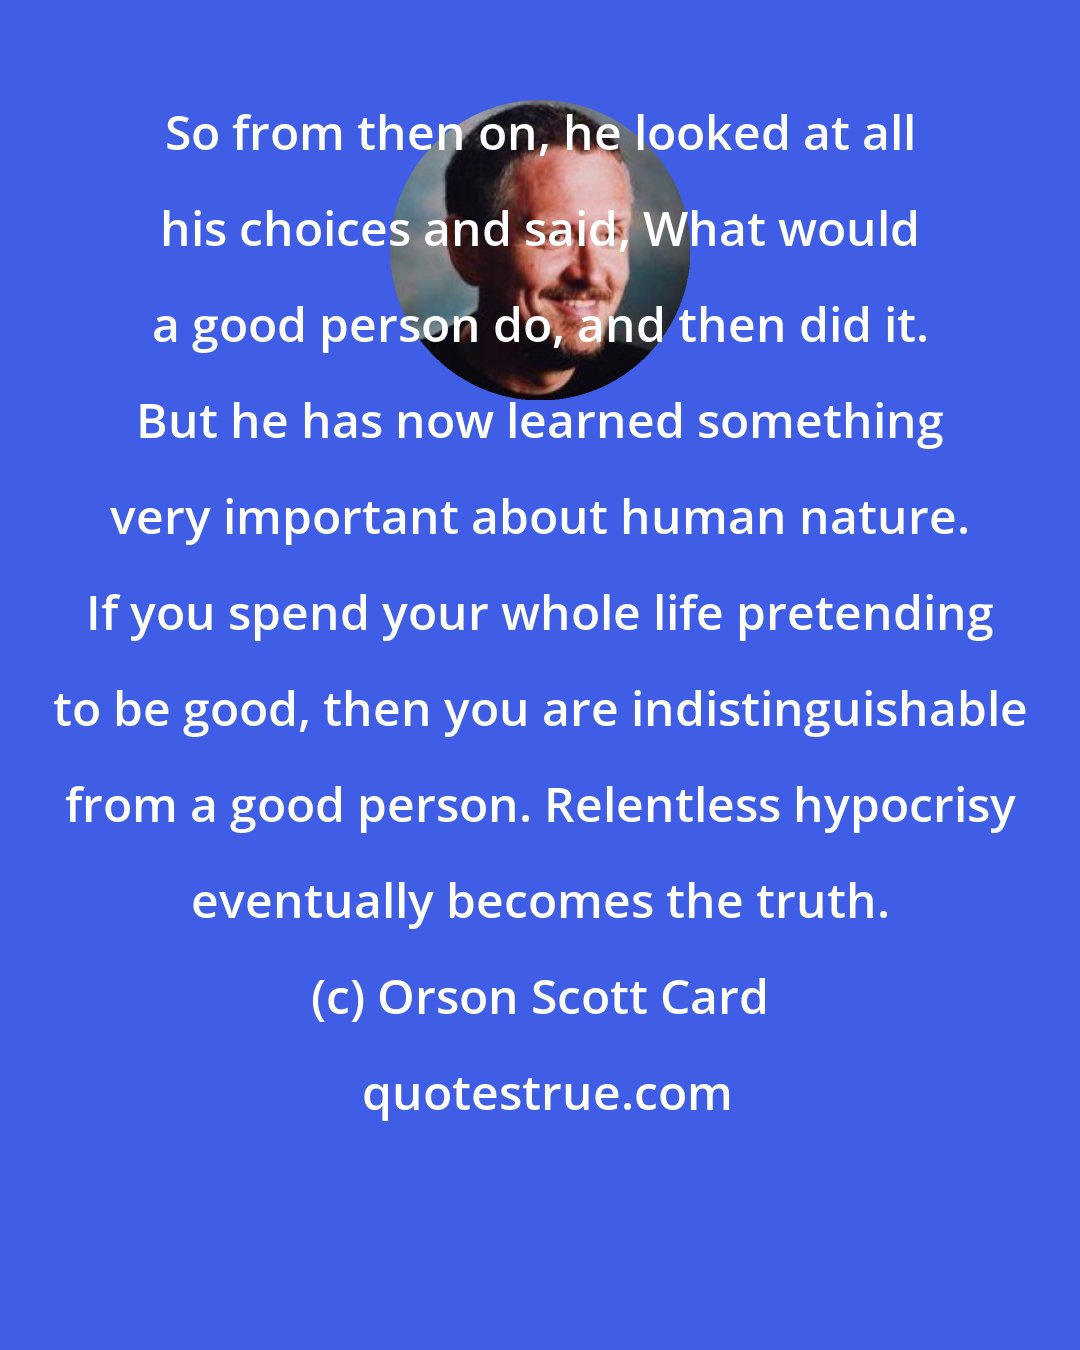 Orson Scott Card: So from then on, he looked at all his choices and said, What would a good person do, and then did it. But he has now learned something very important about human nature. If you spend your whole life pretending to be good, then you are indistinguishable from a good person. Relentless hypocrisy eventually becomes the truth.